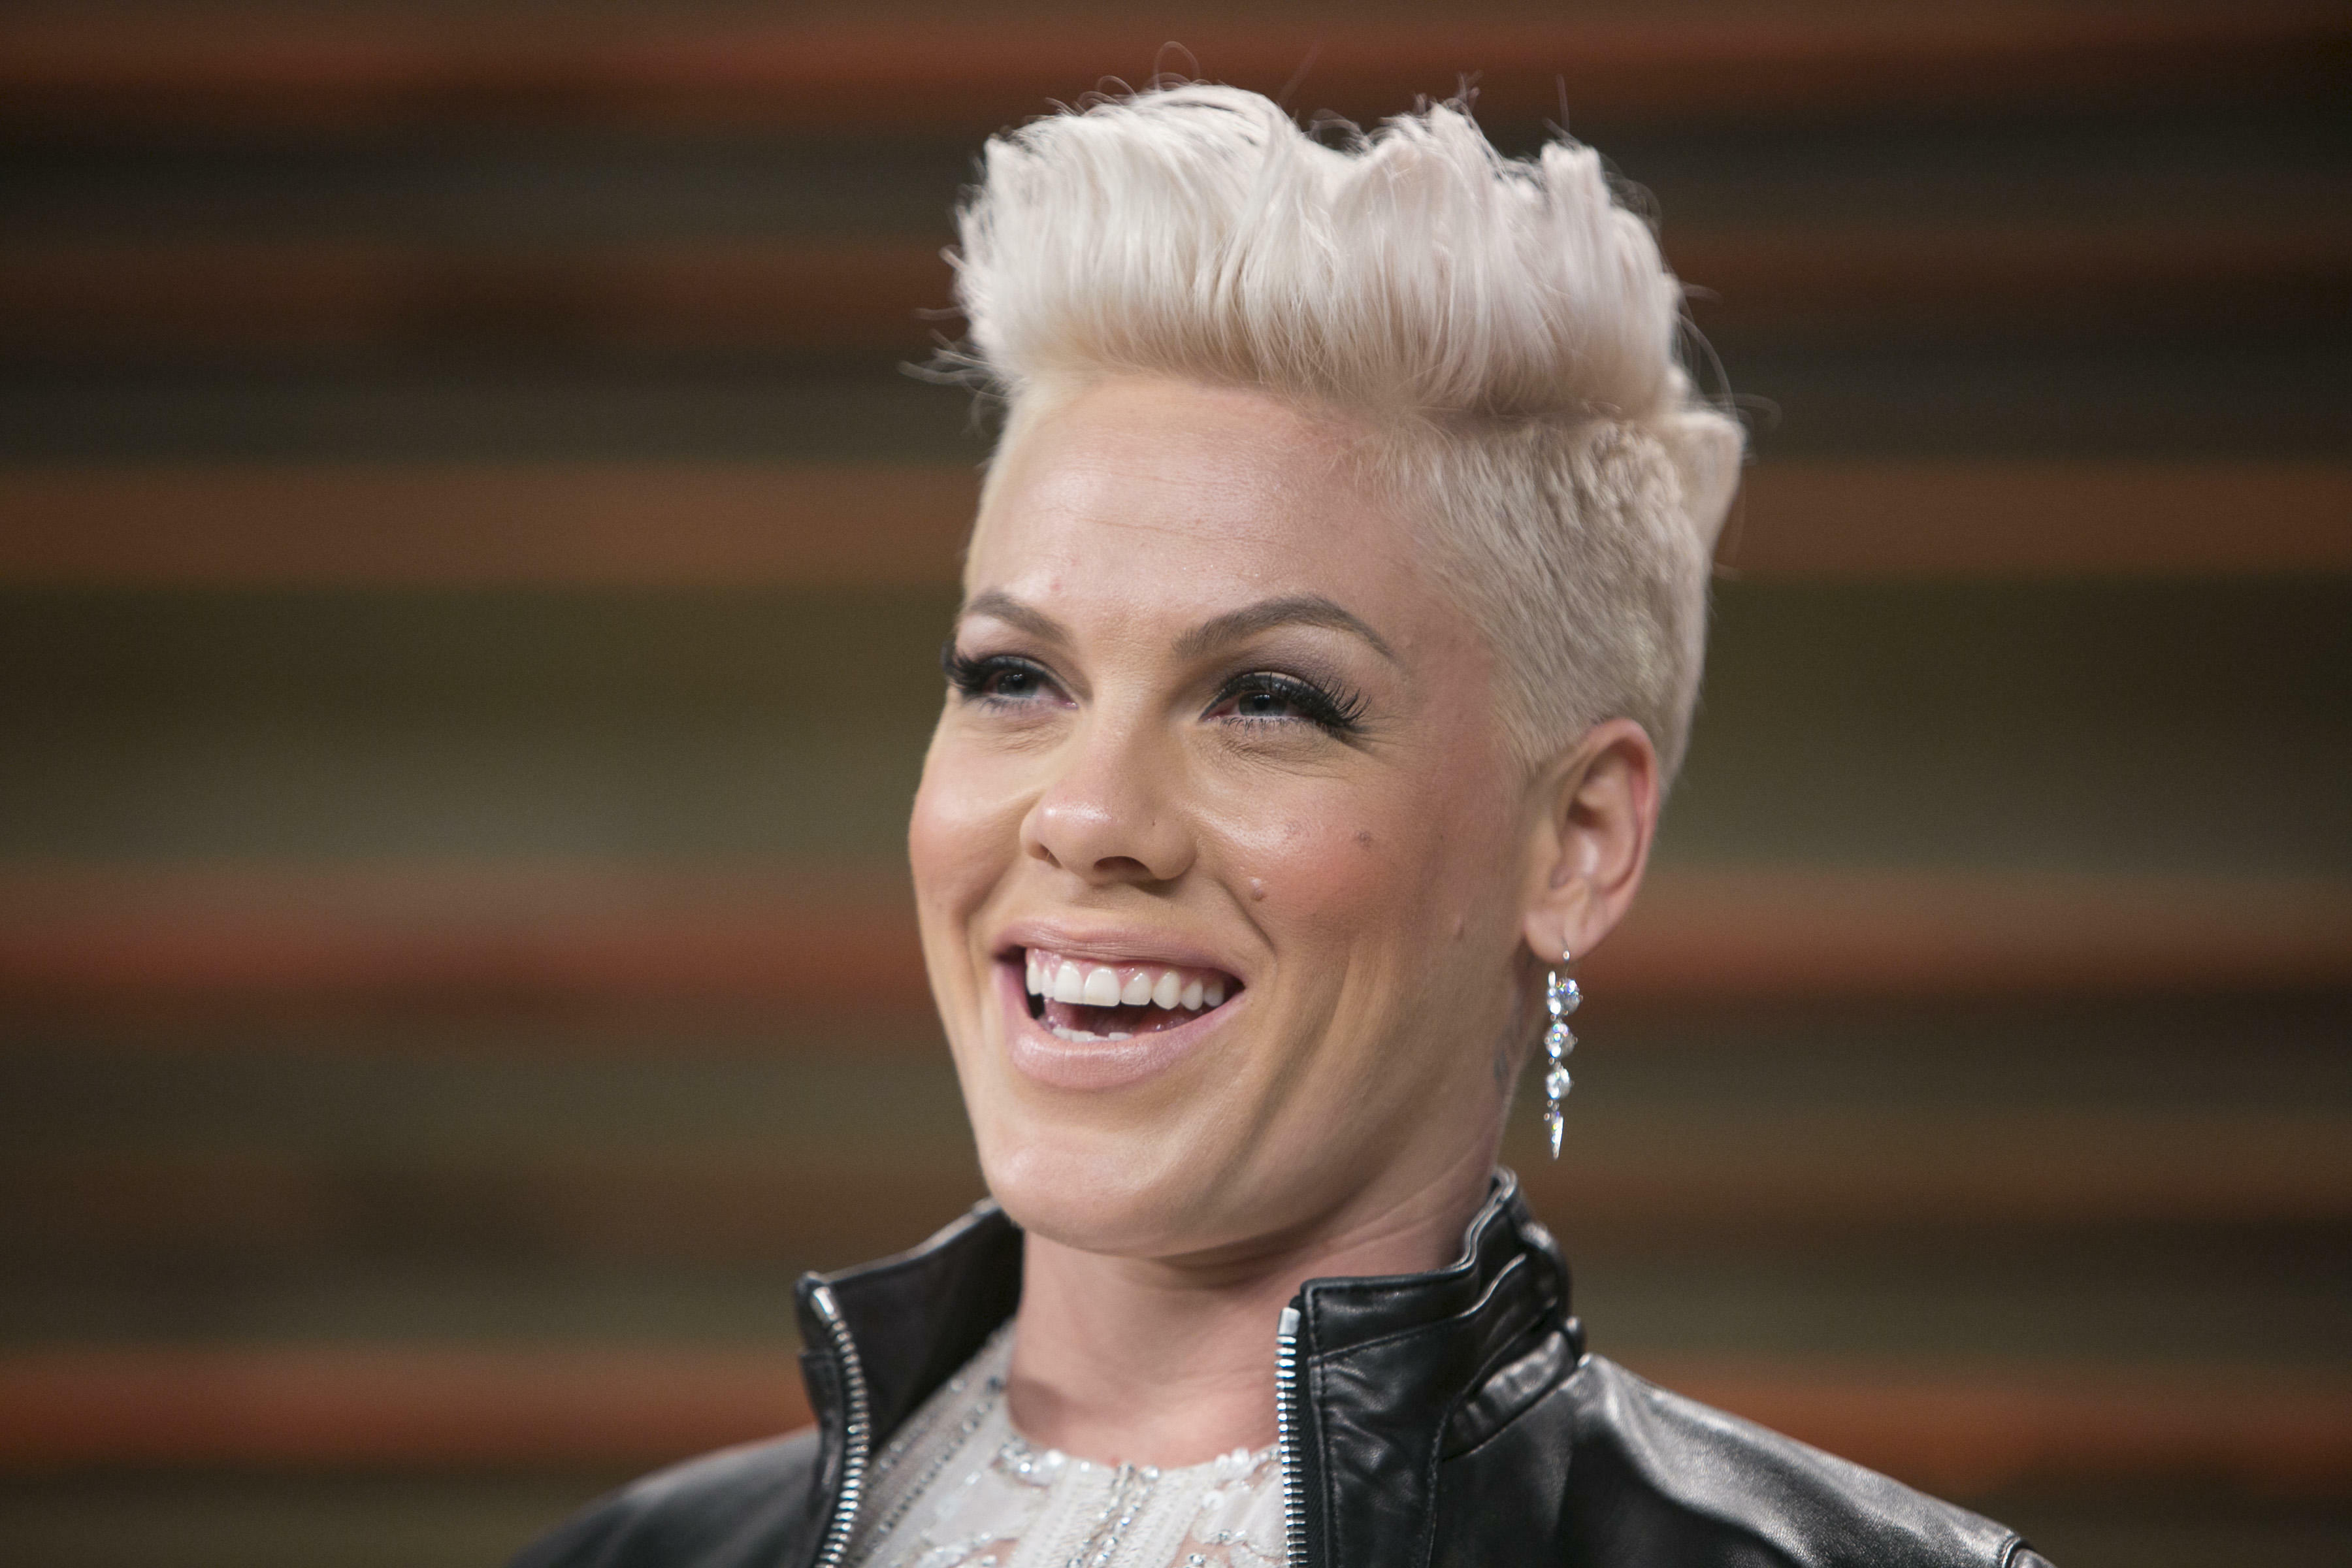 P!nk arrives to the 2014 Vanity Fair Oscar Party on March 2, 2014 in West Hollywood, California. AFP PHOTO/ADRIAN SANCHEZ-GONZALEZ        (Photo credit should read ADRIAN SANCHEZ-GONZALEZ/AFP/Getty Images)